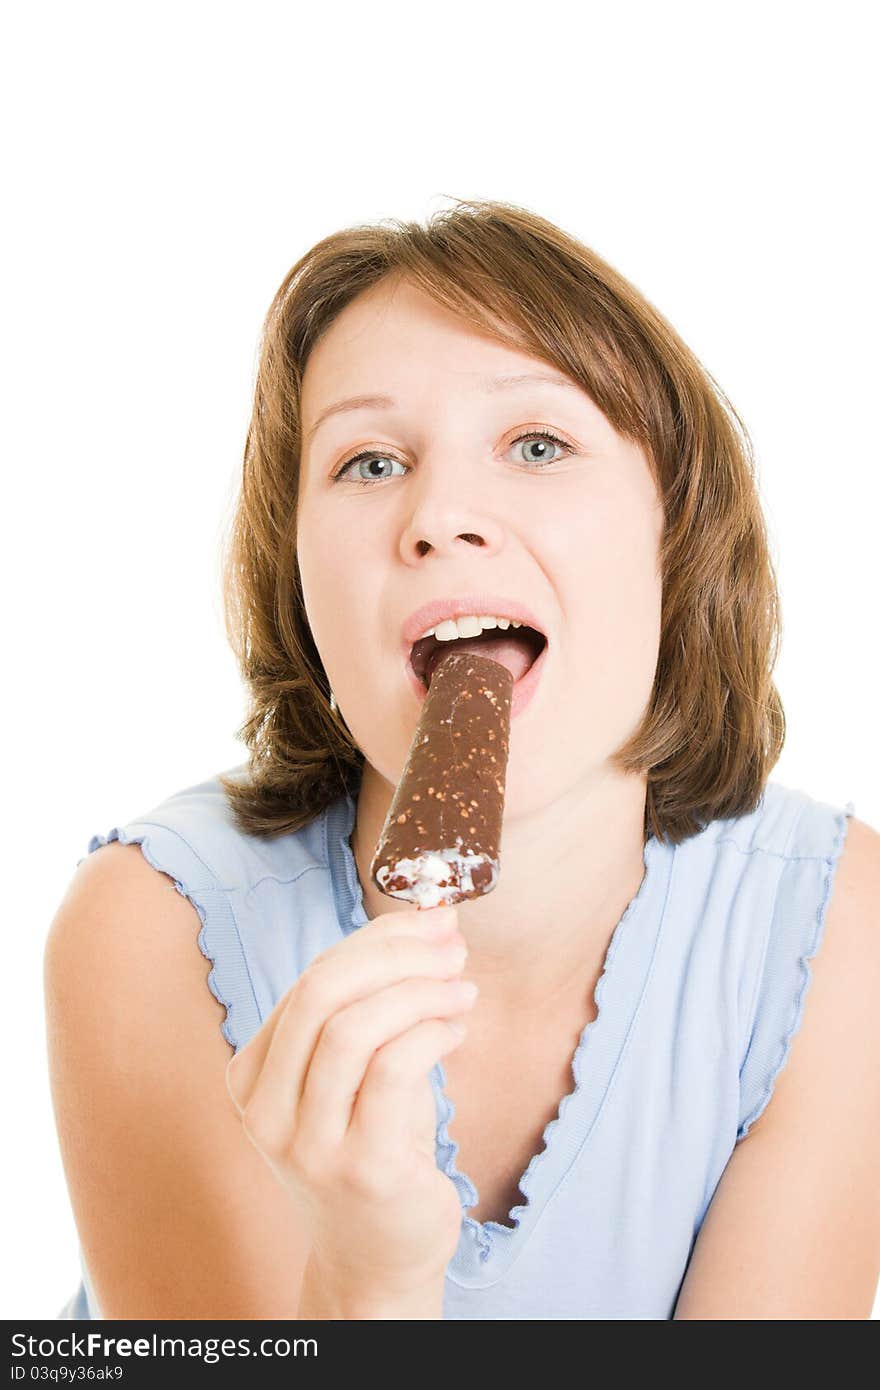 Woman eating ice cream on a white background.